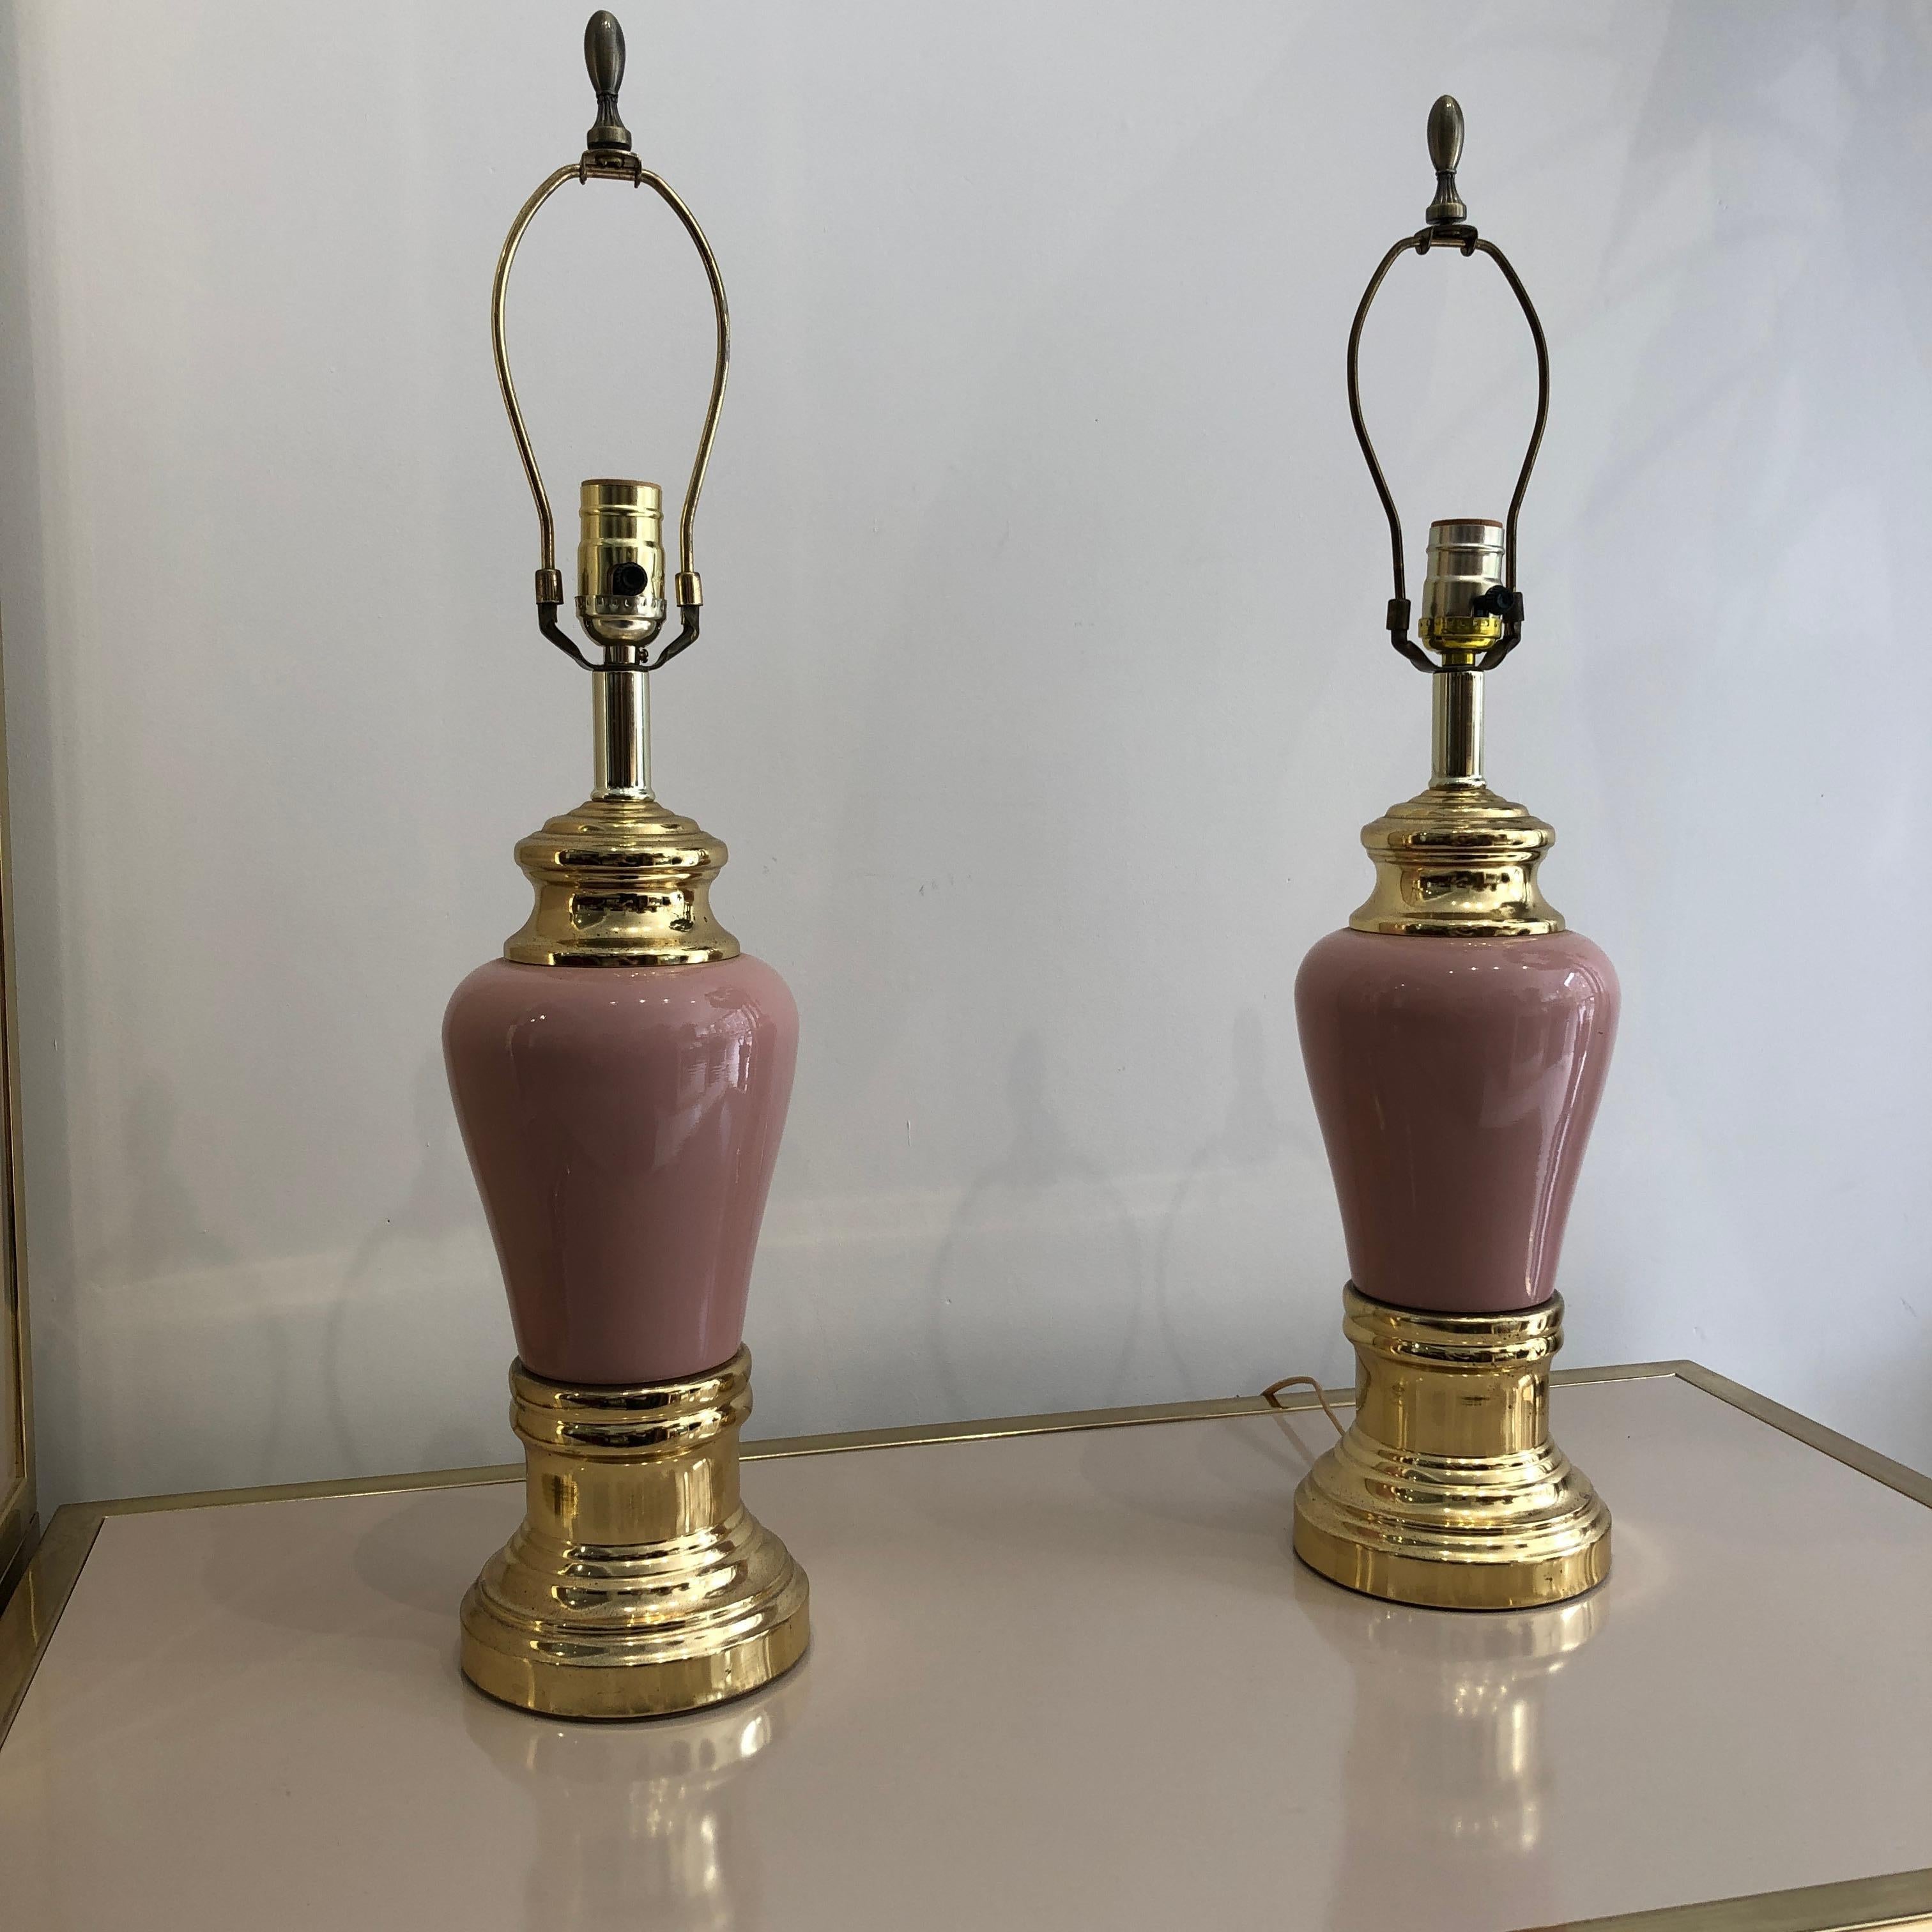 Lovely pair of ceramic table lamps in millennial dust pink body and brass golden base. The lamps have a sculpture like jewellery element feel giving it a glamours look. 
They would look amazing with the right shades and in a modern or vintage